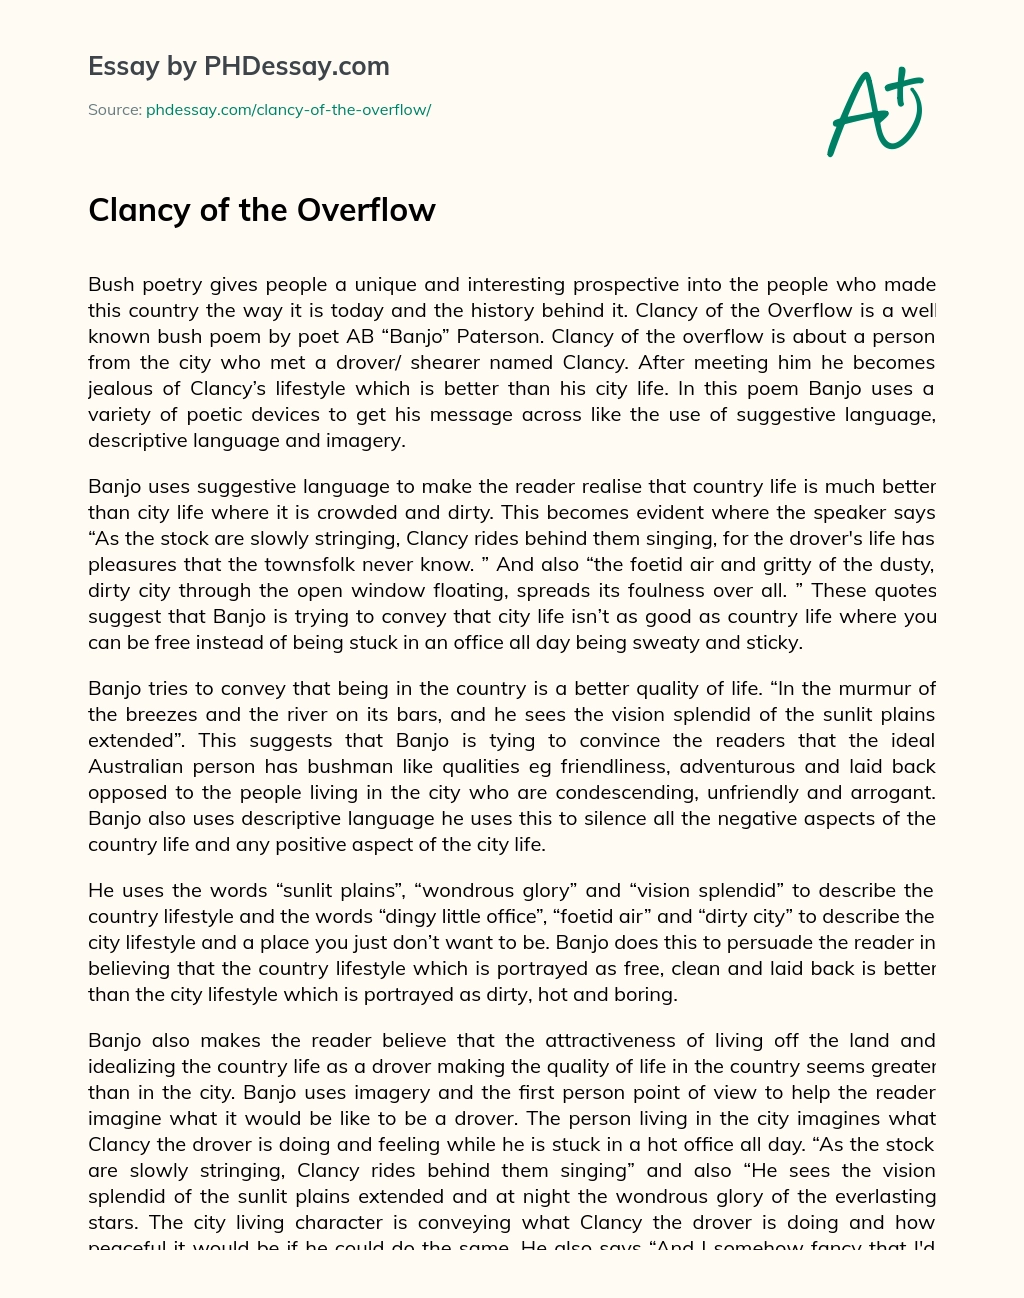 Clancy of the Overflow essay